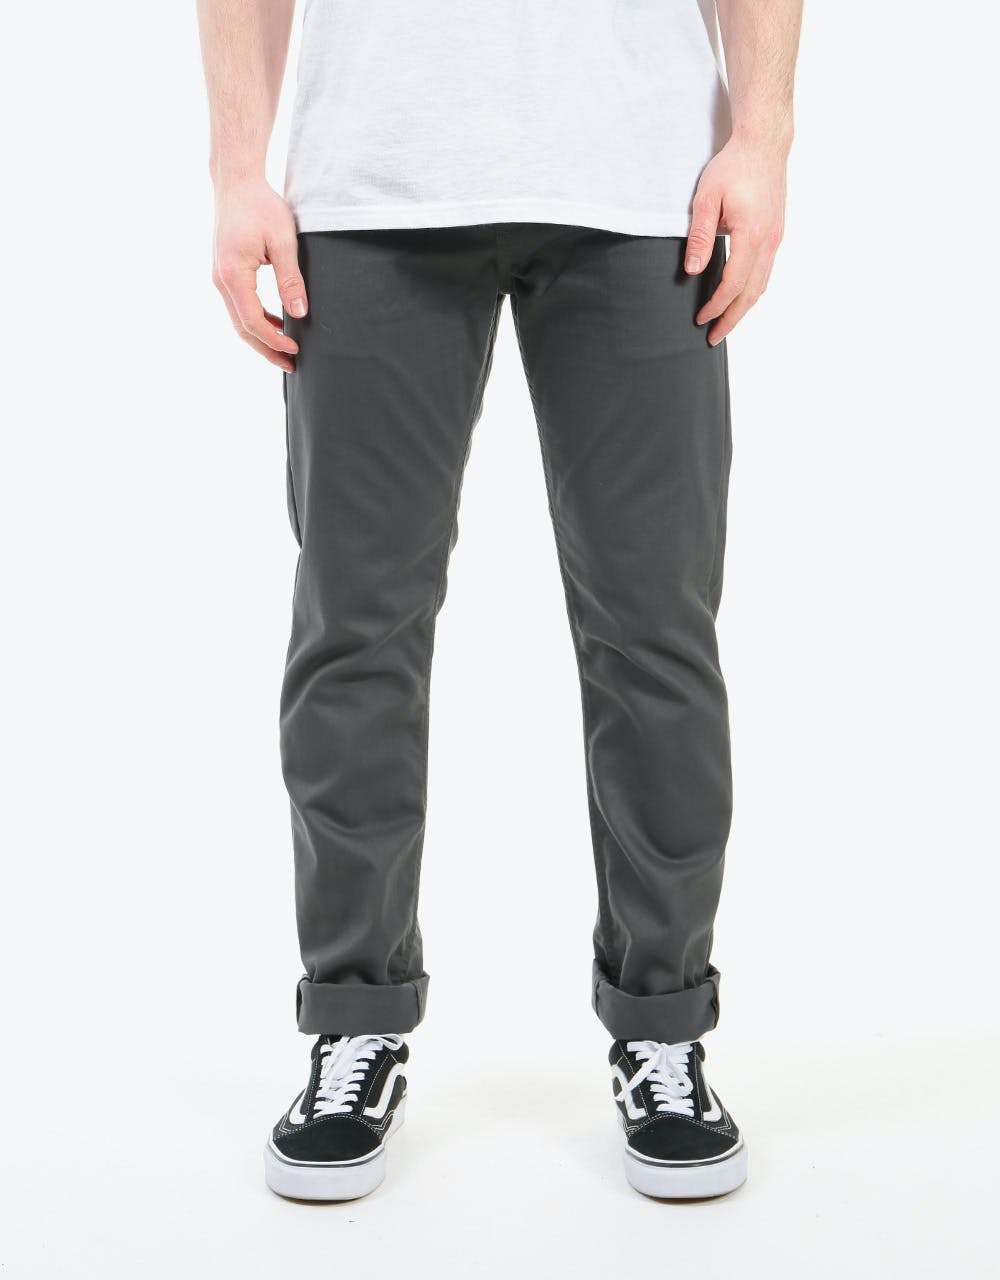 Patagonia Performance Twill Jeans - Forge Grey